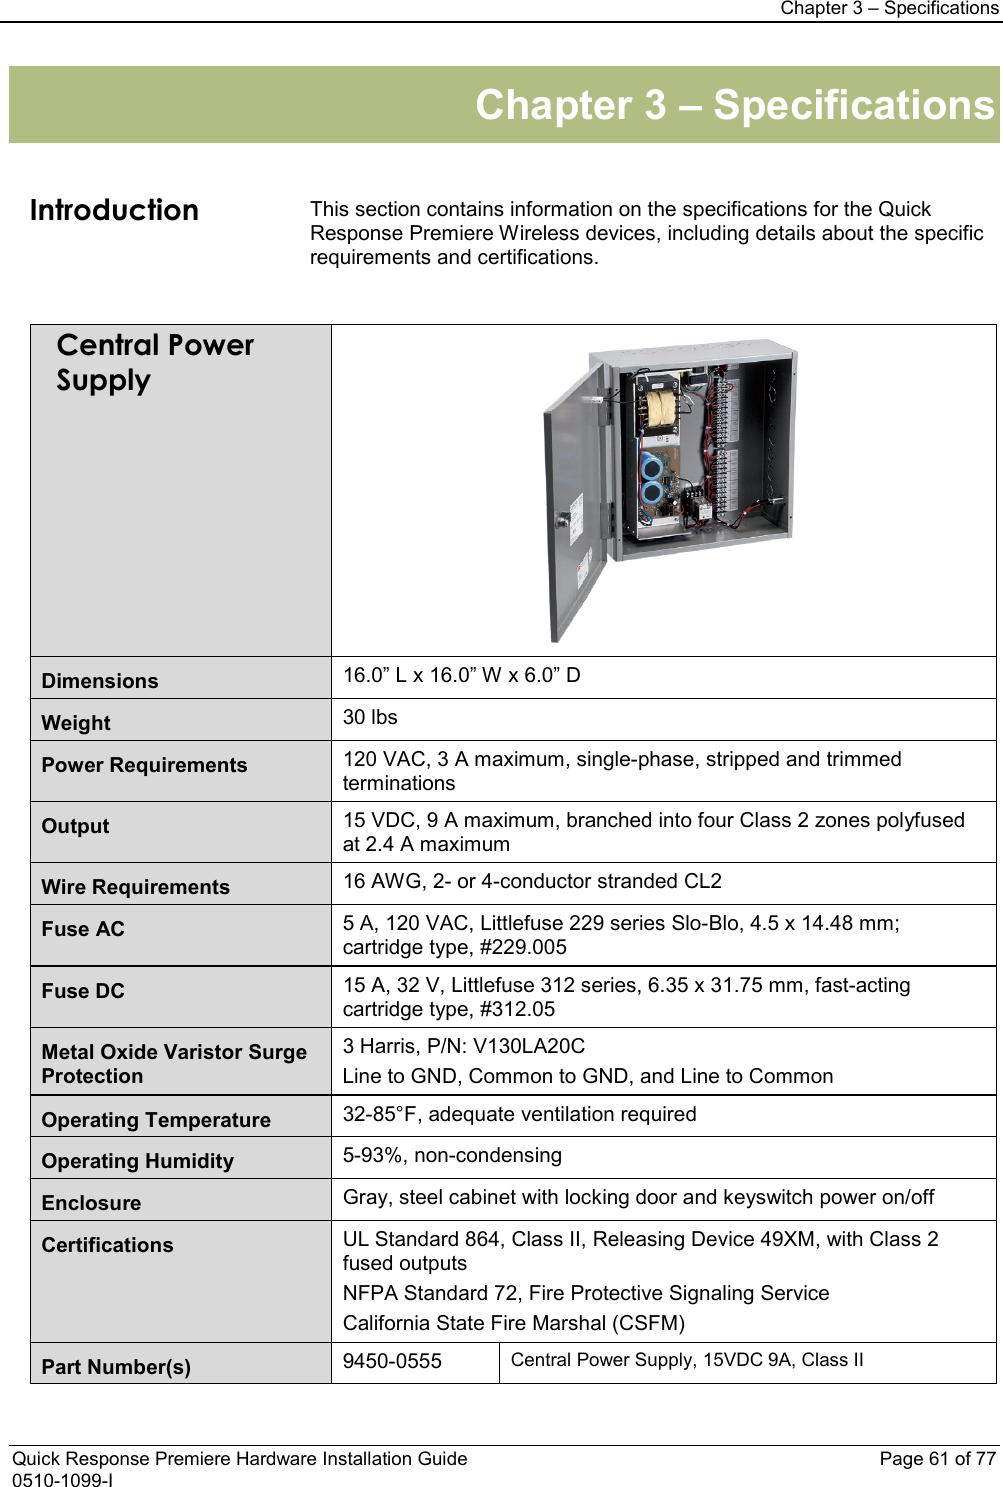 Chapter 3 – Specifications  Quick Response Premiere Hardware Installation Guide    Page 61 of 77 0510-1099-I Chapter 3 – Specifications   Introduction This section contains information on the specifications for the Quick Response Premiere Wireless devices, including details about the specific requirements and certifications.     Central Power Supply  Dimensions 16.0” L x 16.0” W x 6.0” D Weight 30 lbs Power Requirements 120 VAC, 3 A maximum, single-phase, stripped and trimmed terminations Output 15 VDC, 9 A maximum, branched into four Class 2 zones polyfused at 2.4 A maximum Wire Requirements 16 AWG, 2- or 4-conductor stranded CL2 Fuse AC 5 A, 120 VAC, Littlefuse 229 series Slo-Blo, 4.5 x 14.48 mm; cartridge type, #229.005 Fuse DC 15 A, 32 V, Littlefuse 312 series, 6.35 x 31.75 mm, fast-acting cartridge type, #312.05 Metal Oxide Varistor Surge Protection 3 Harris, P/N: V130LA20C Line to GND, Common to GND, and Line to Common Operating Temperature 32-85°F, adequate ventilation required Operating Humidity 5-93%, non-condensing Enclosure Gray, steel cabinet with locking door and keyswitch power on/off Certifications UL Standard 864, Class II, Releasing Device 49XM, with Class 2 fused outputs NFPA Standard 72, Fire Protective Signaling Service California State Fire Marshal (CSFM) Part Number(s)  9450-0555  Central Power Supply, 15VDC 9A, Class II  